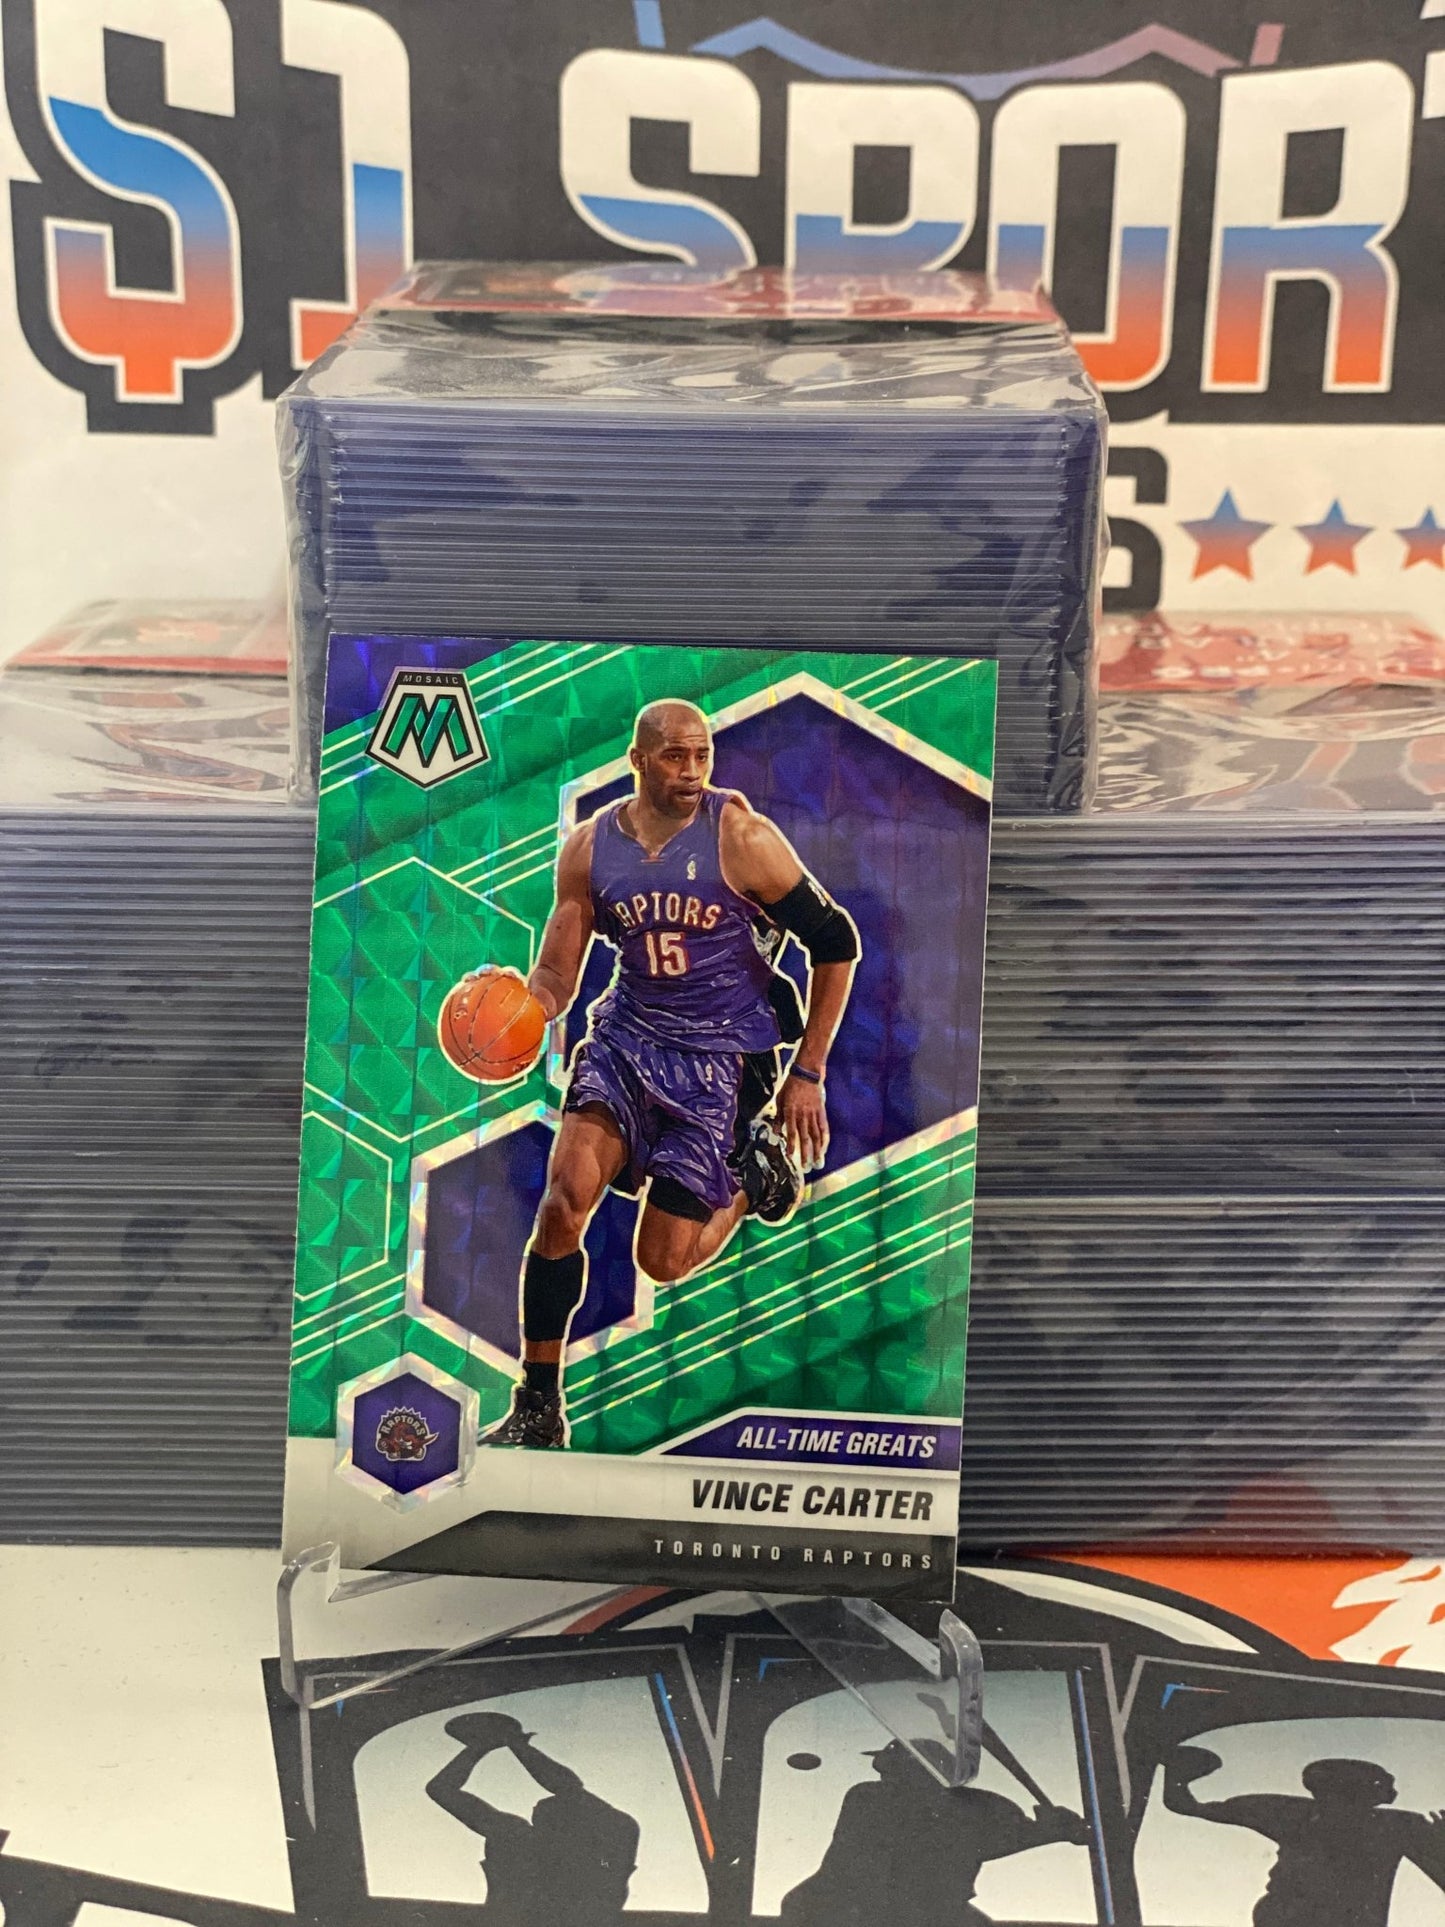 2020 Panini Mosaic (Green Prizm, All-Time Greats) Vince Carter #290